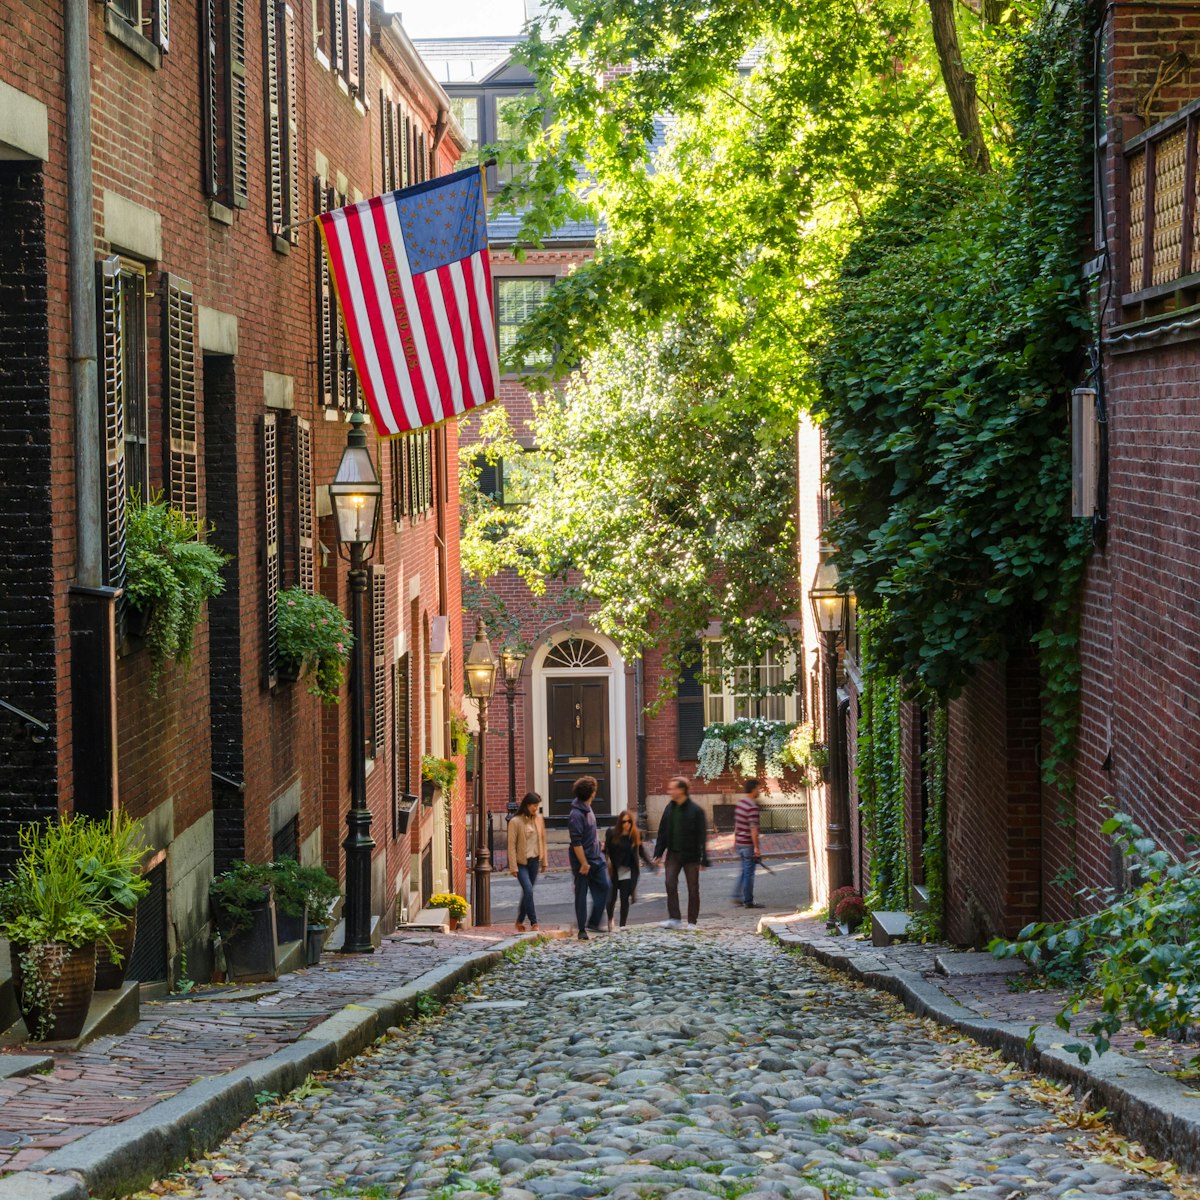 Boston, USA - October 10, 2015: Tourists wandering along Acorn Street in Beacon Hill on a warm autumn day. Beacon Hill is one of the oldest and most picturesque neighborhoods in the United States.